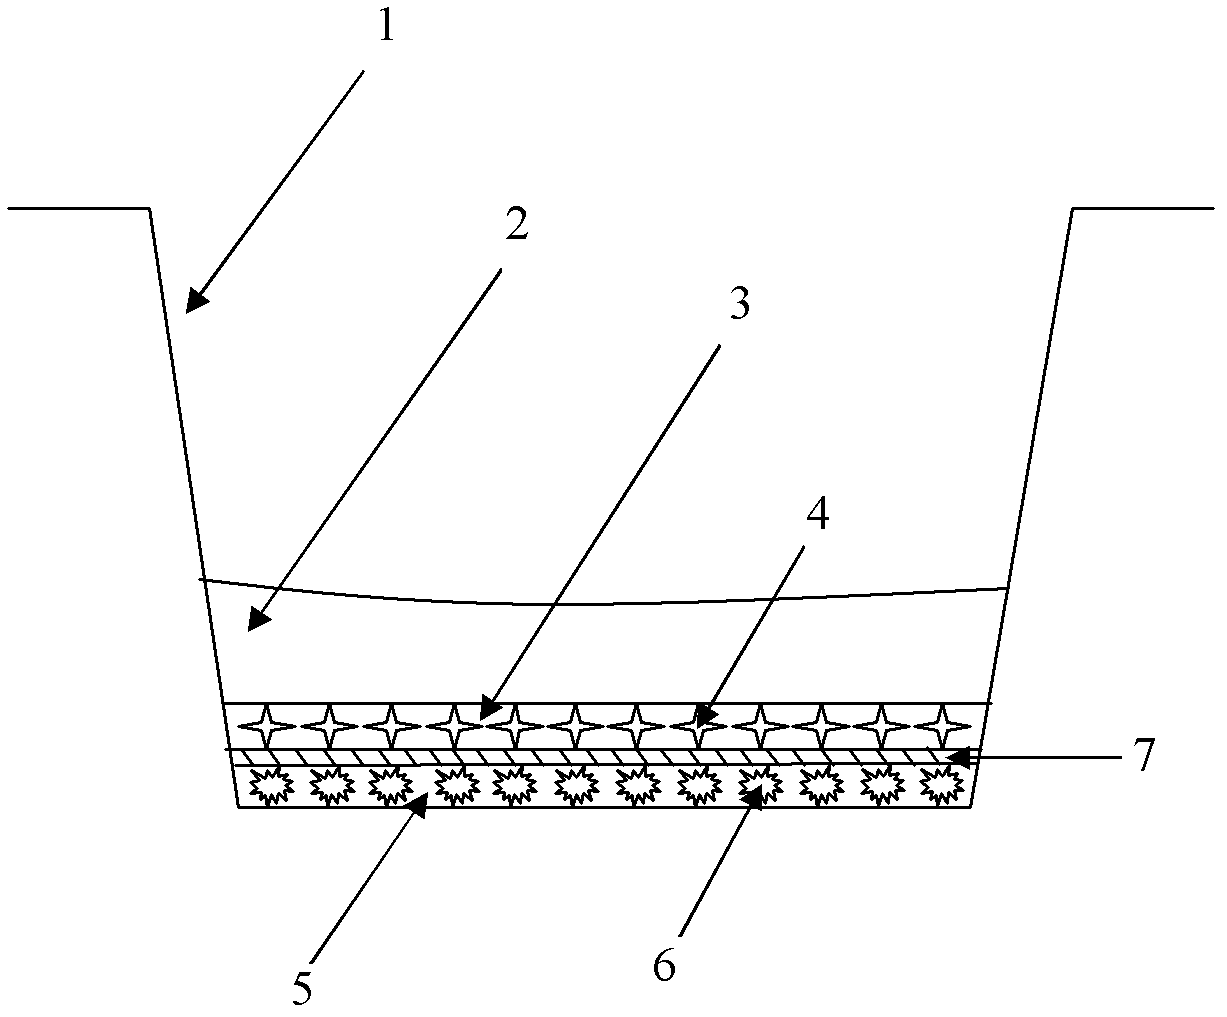 Non-contact three-dimensional co-culture method for cells